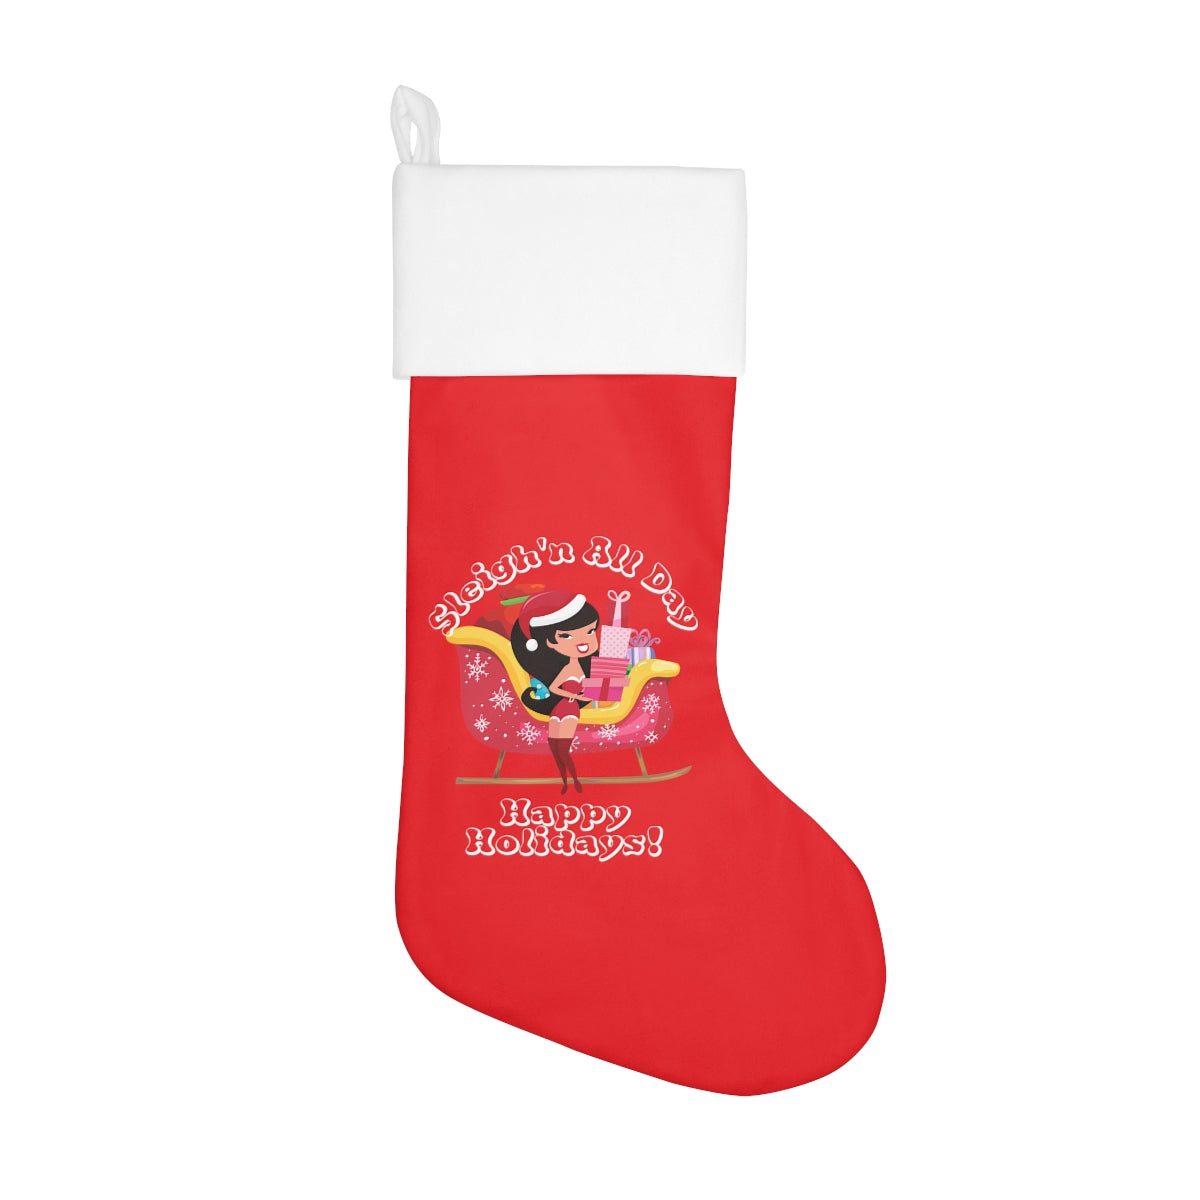 Sleigh'n All Day Holiday Stocking